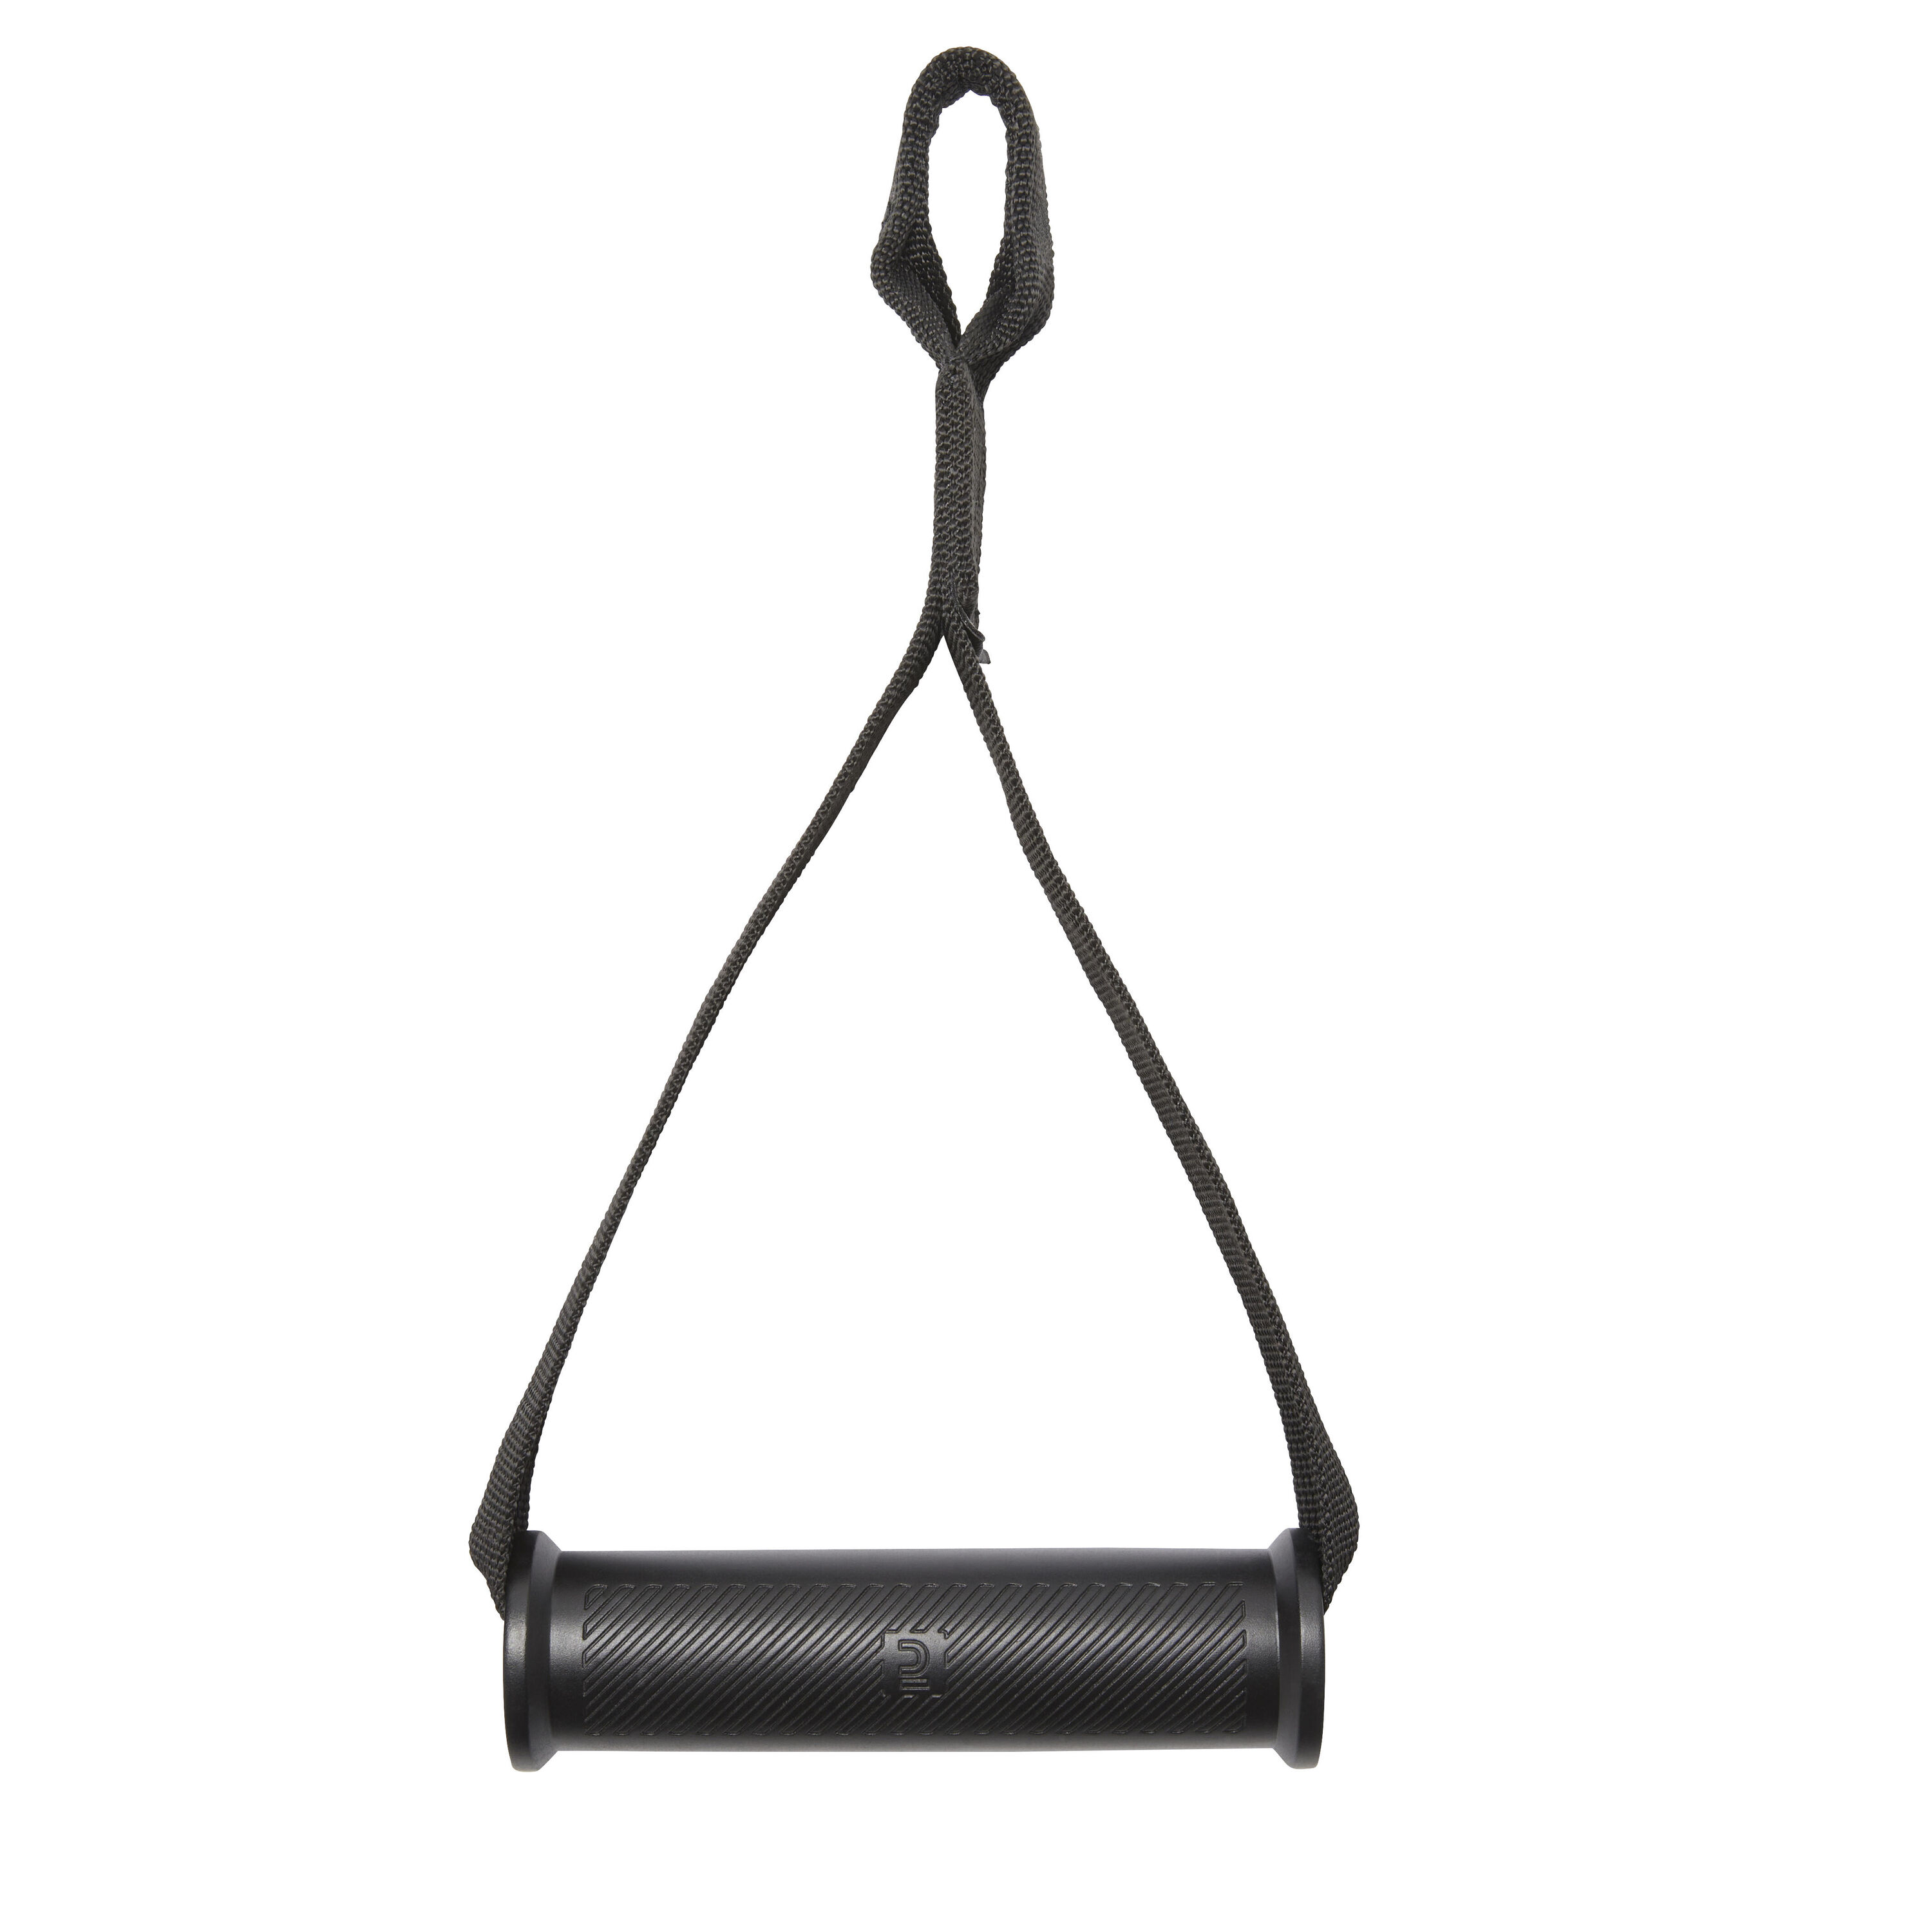 CORENGTH Weight Training Pulley Handle - Black